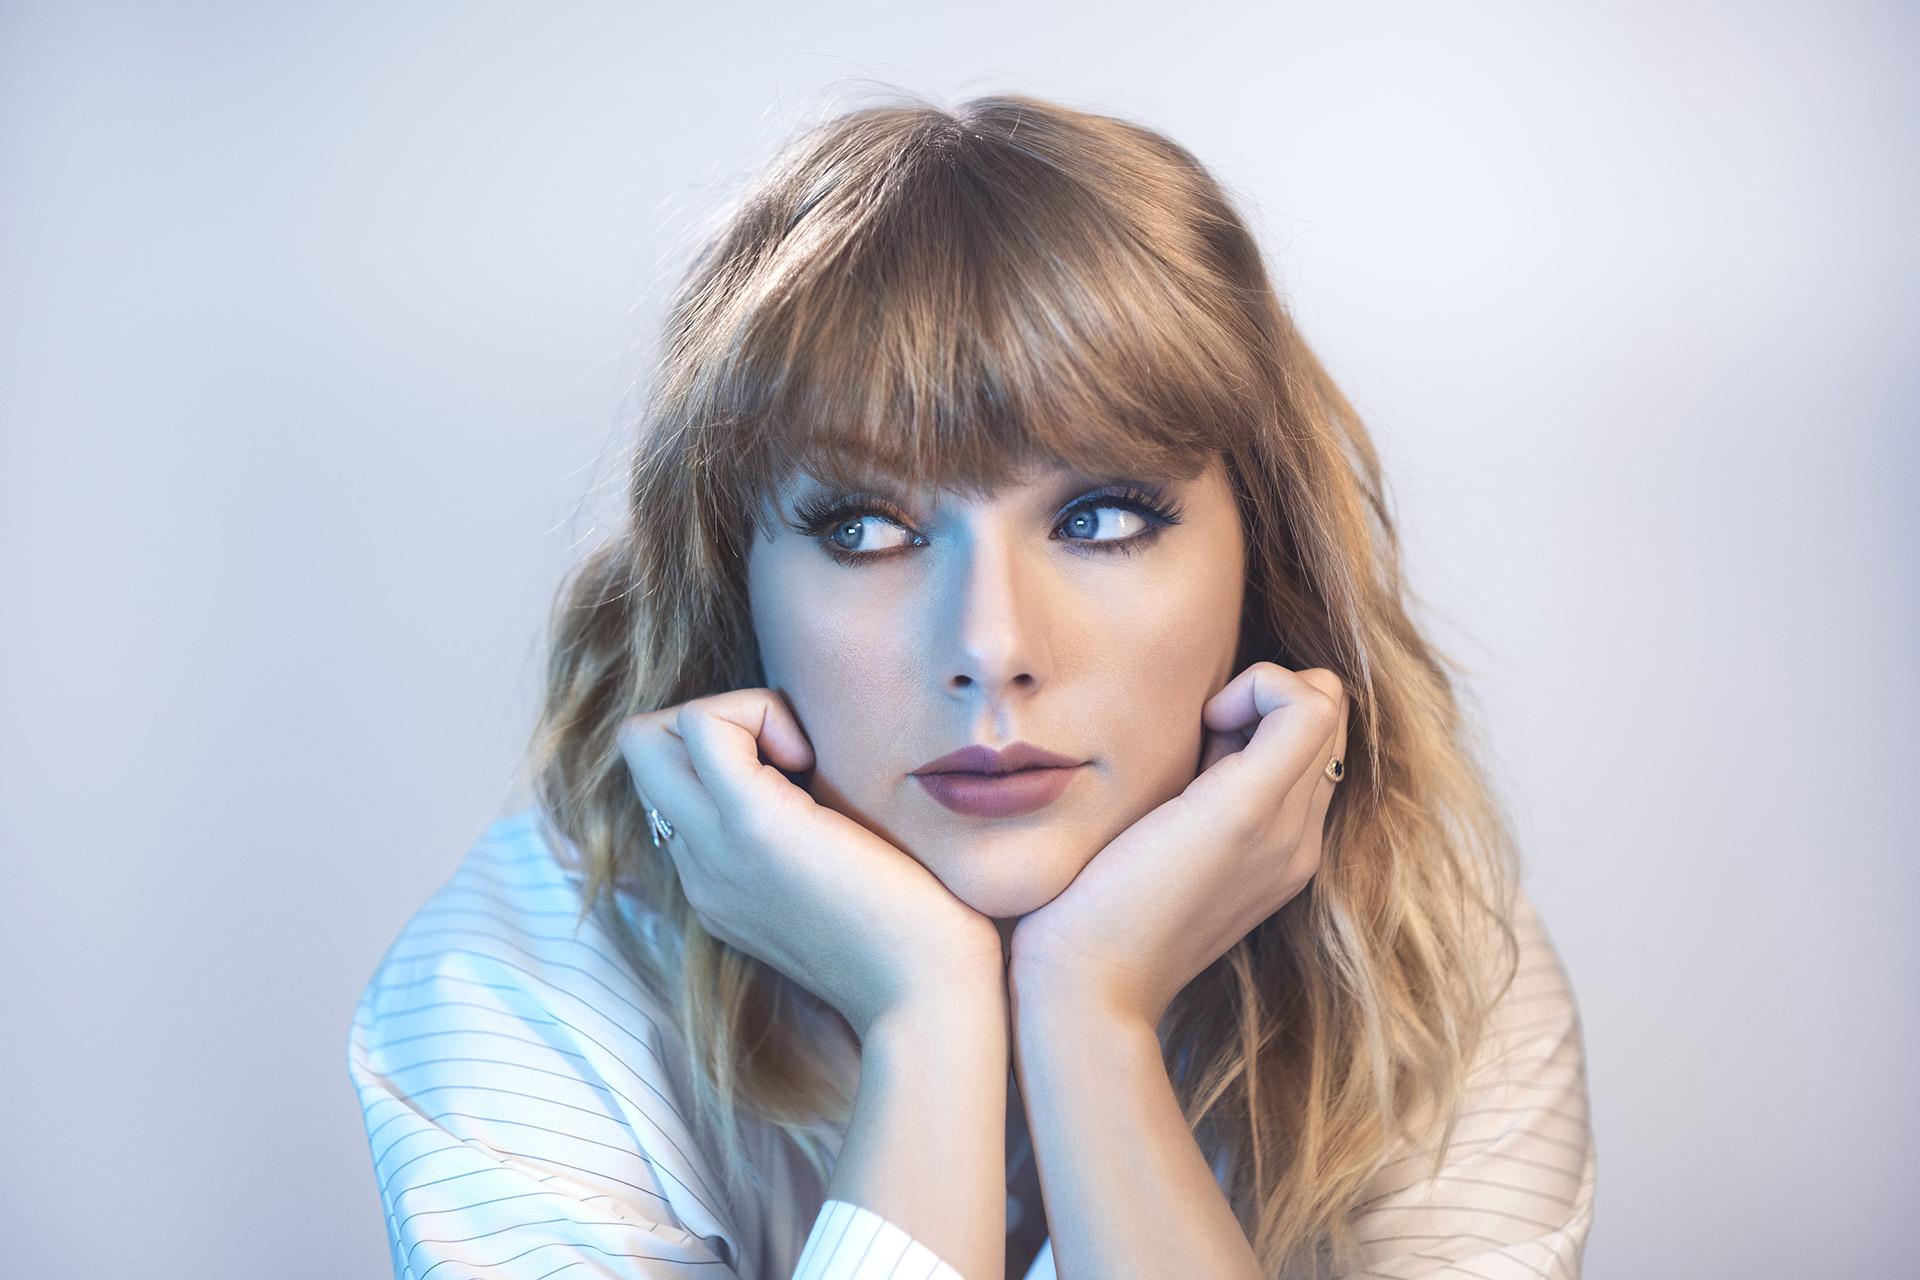 Taylor Swift 2019 Wallpapers Wallpaper Cave